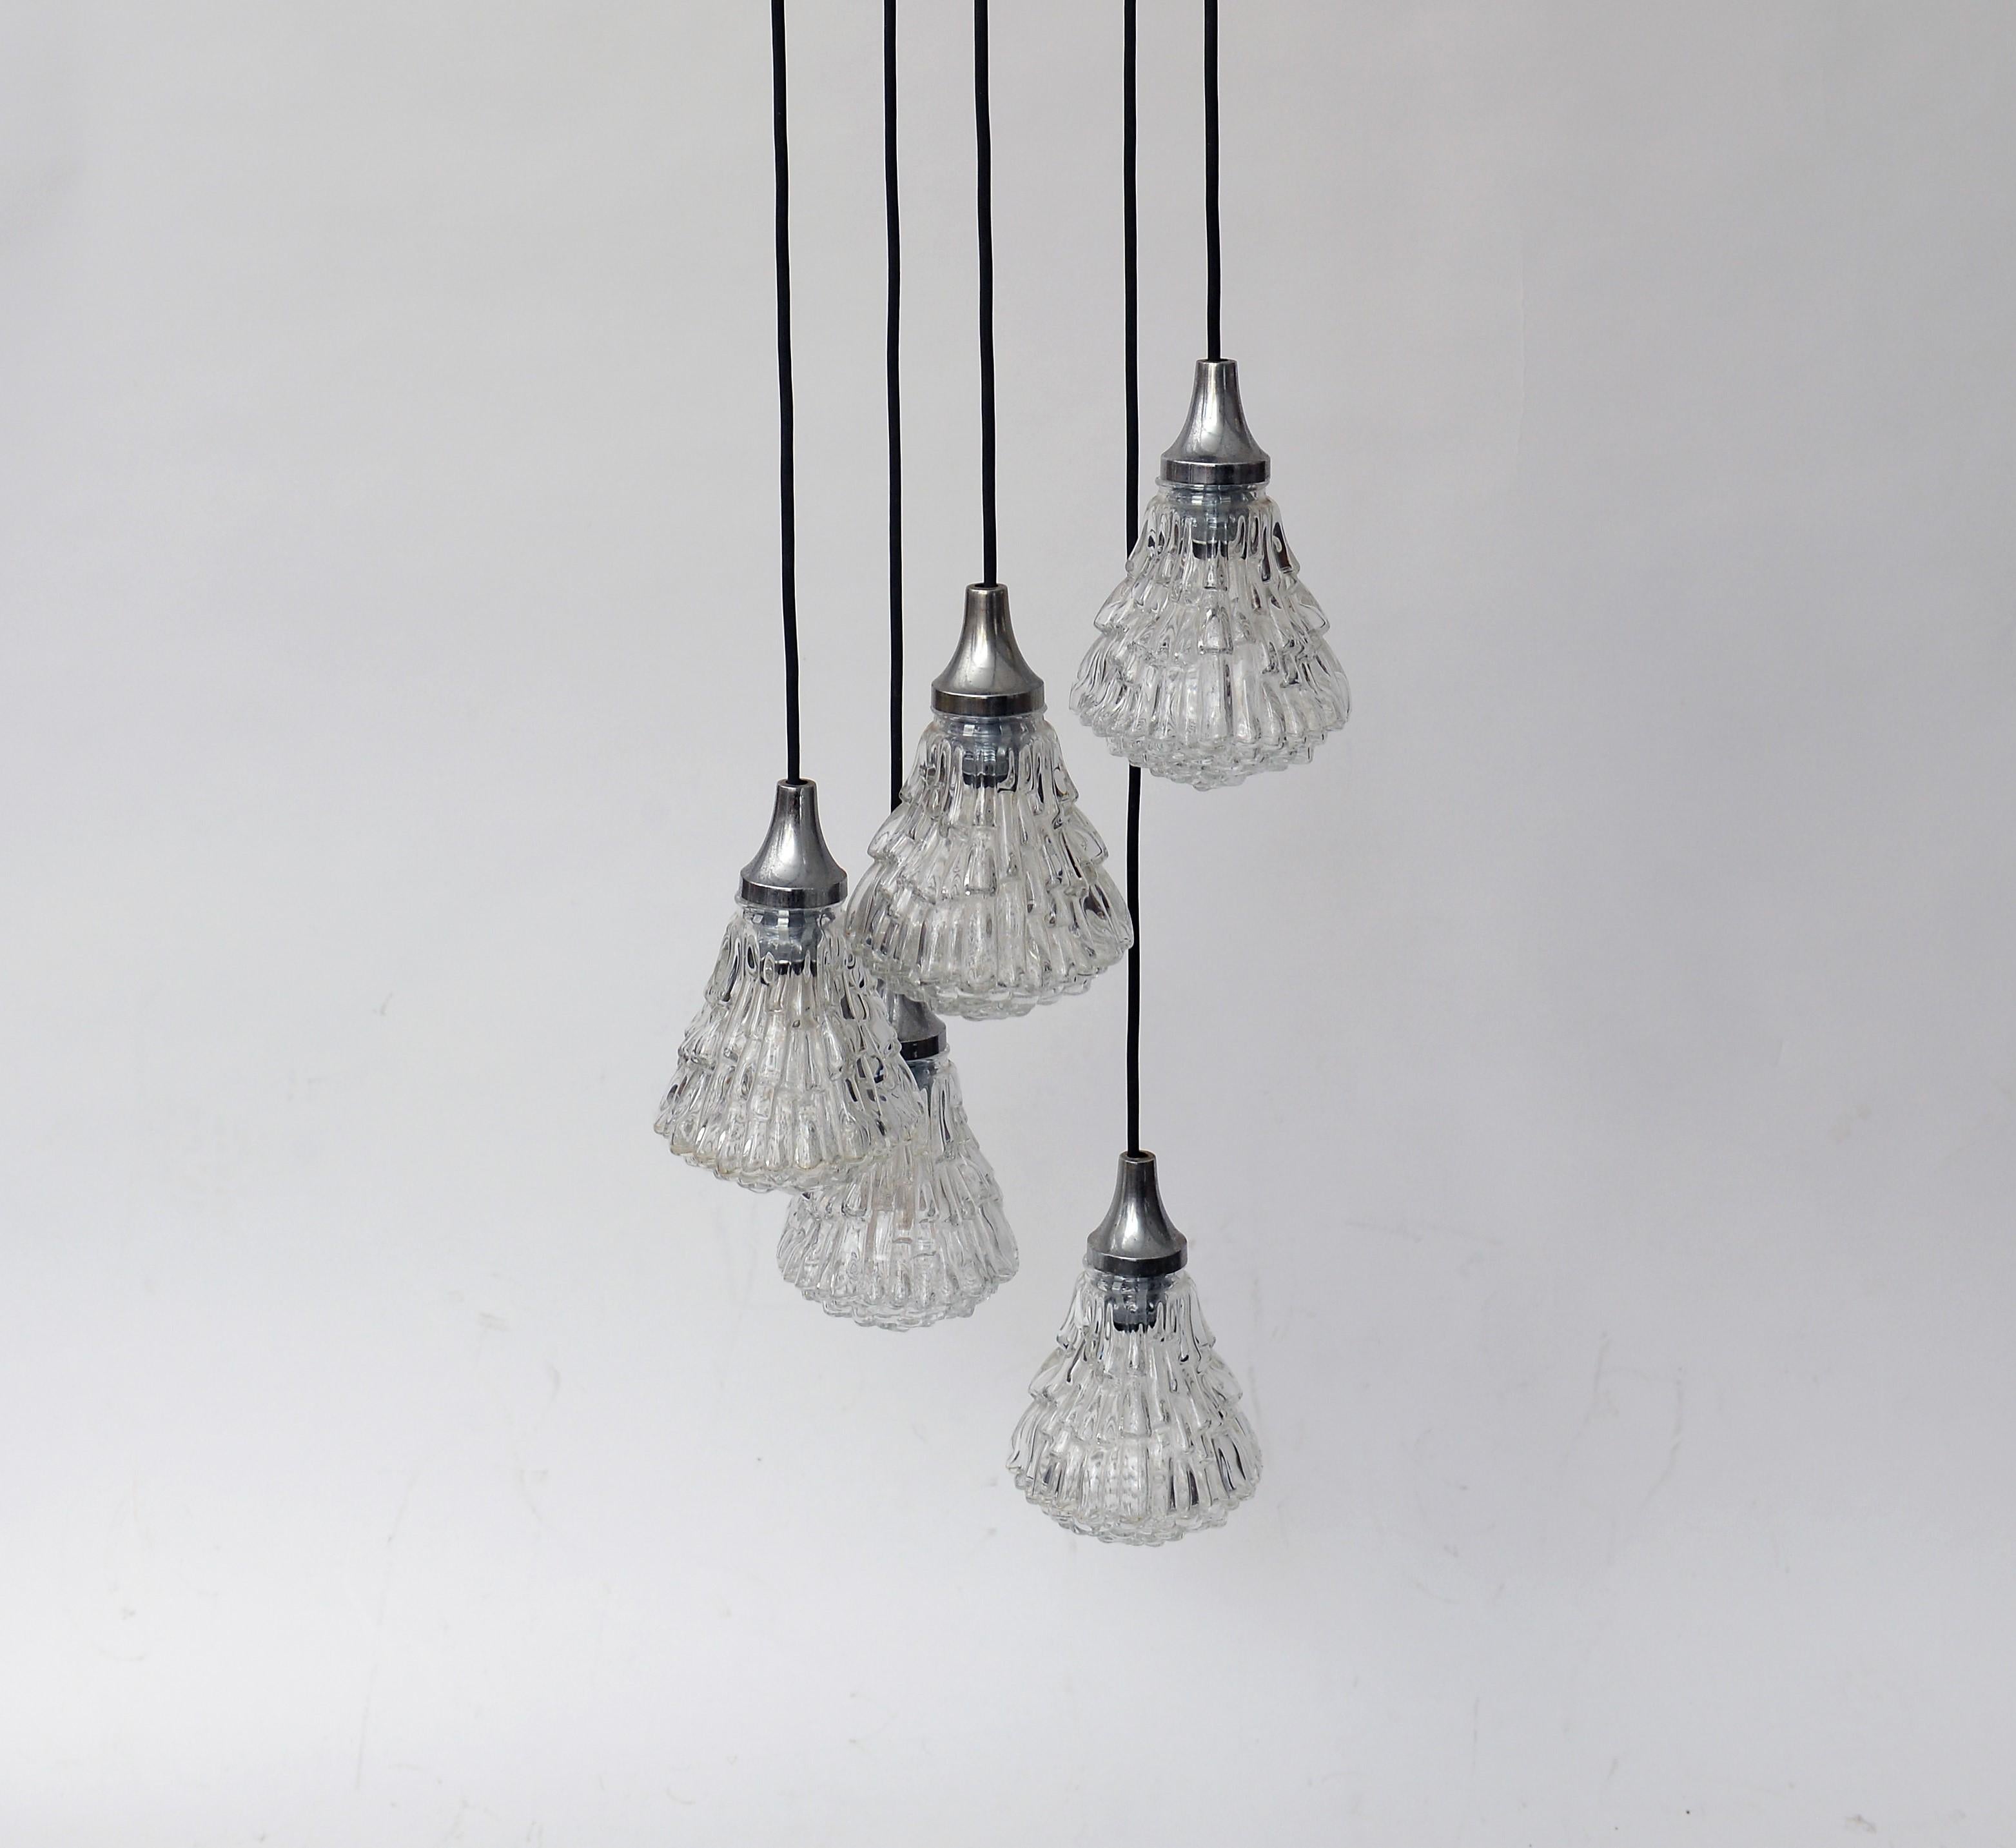 Beautiful 5 lightpoint pendant chandelier.

The chandelier consists of 5 'ice' like glass lamp shades with chrome shade holders.

The lamp emits a beautiful light.

The length is adjustable.

1960s, Germany

Very good condition.

Tested